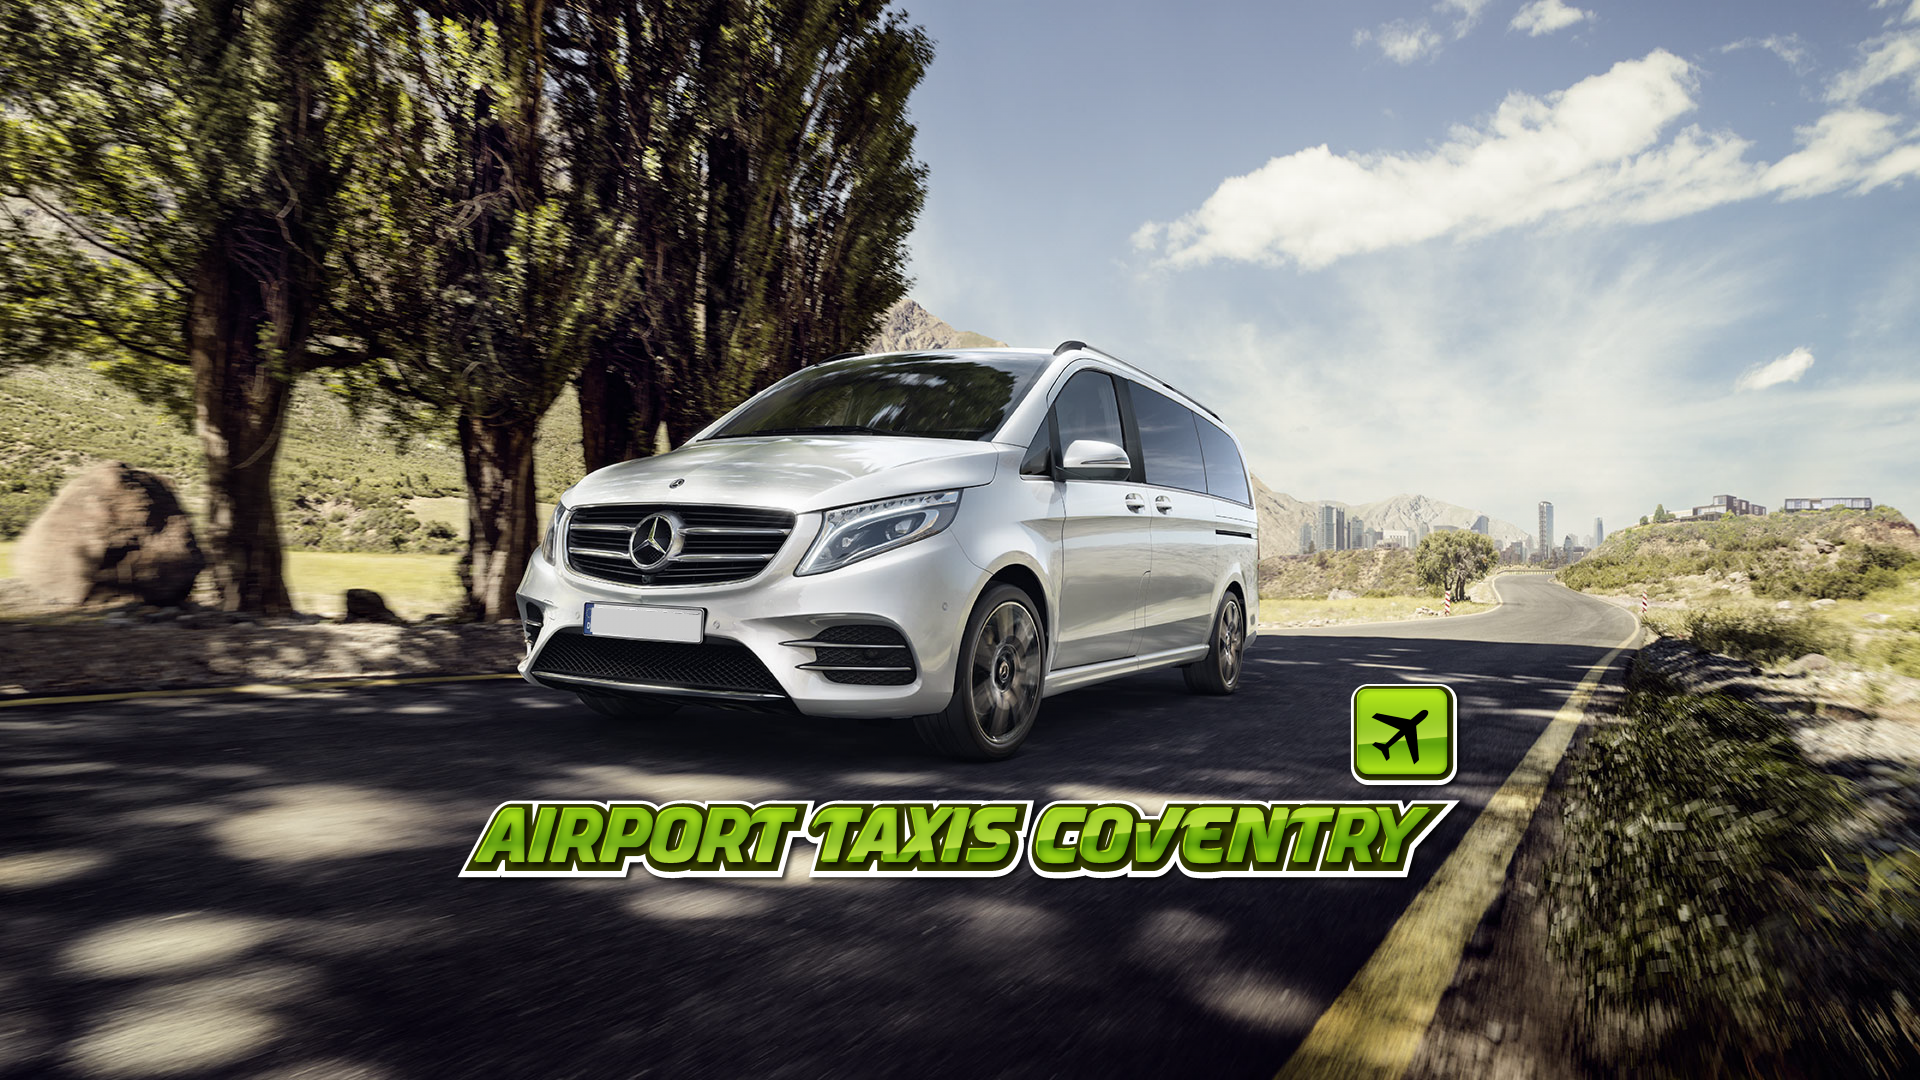 Airport Taxi Coventry UK